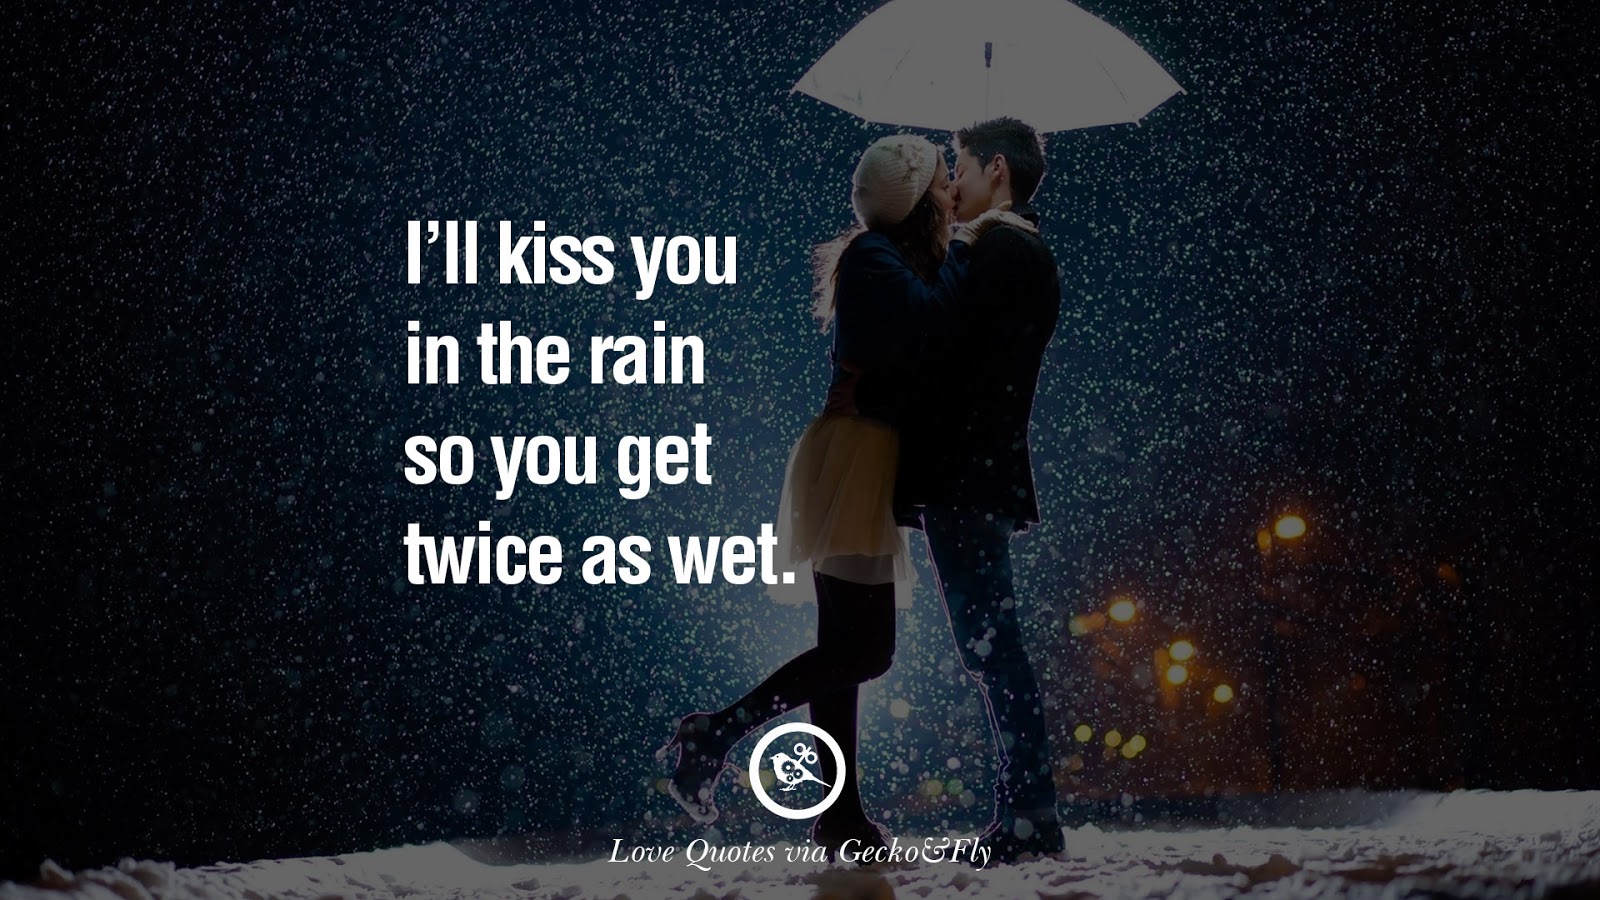 Dancing In The Rain Quotes - Rain Love Quotes For Her - HD Wallpaper 